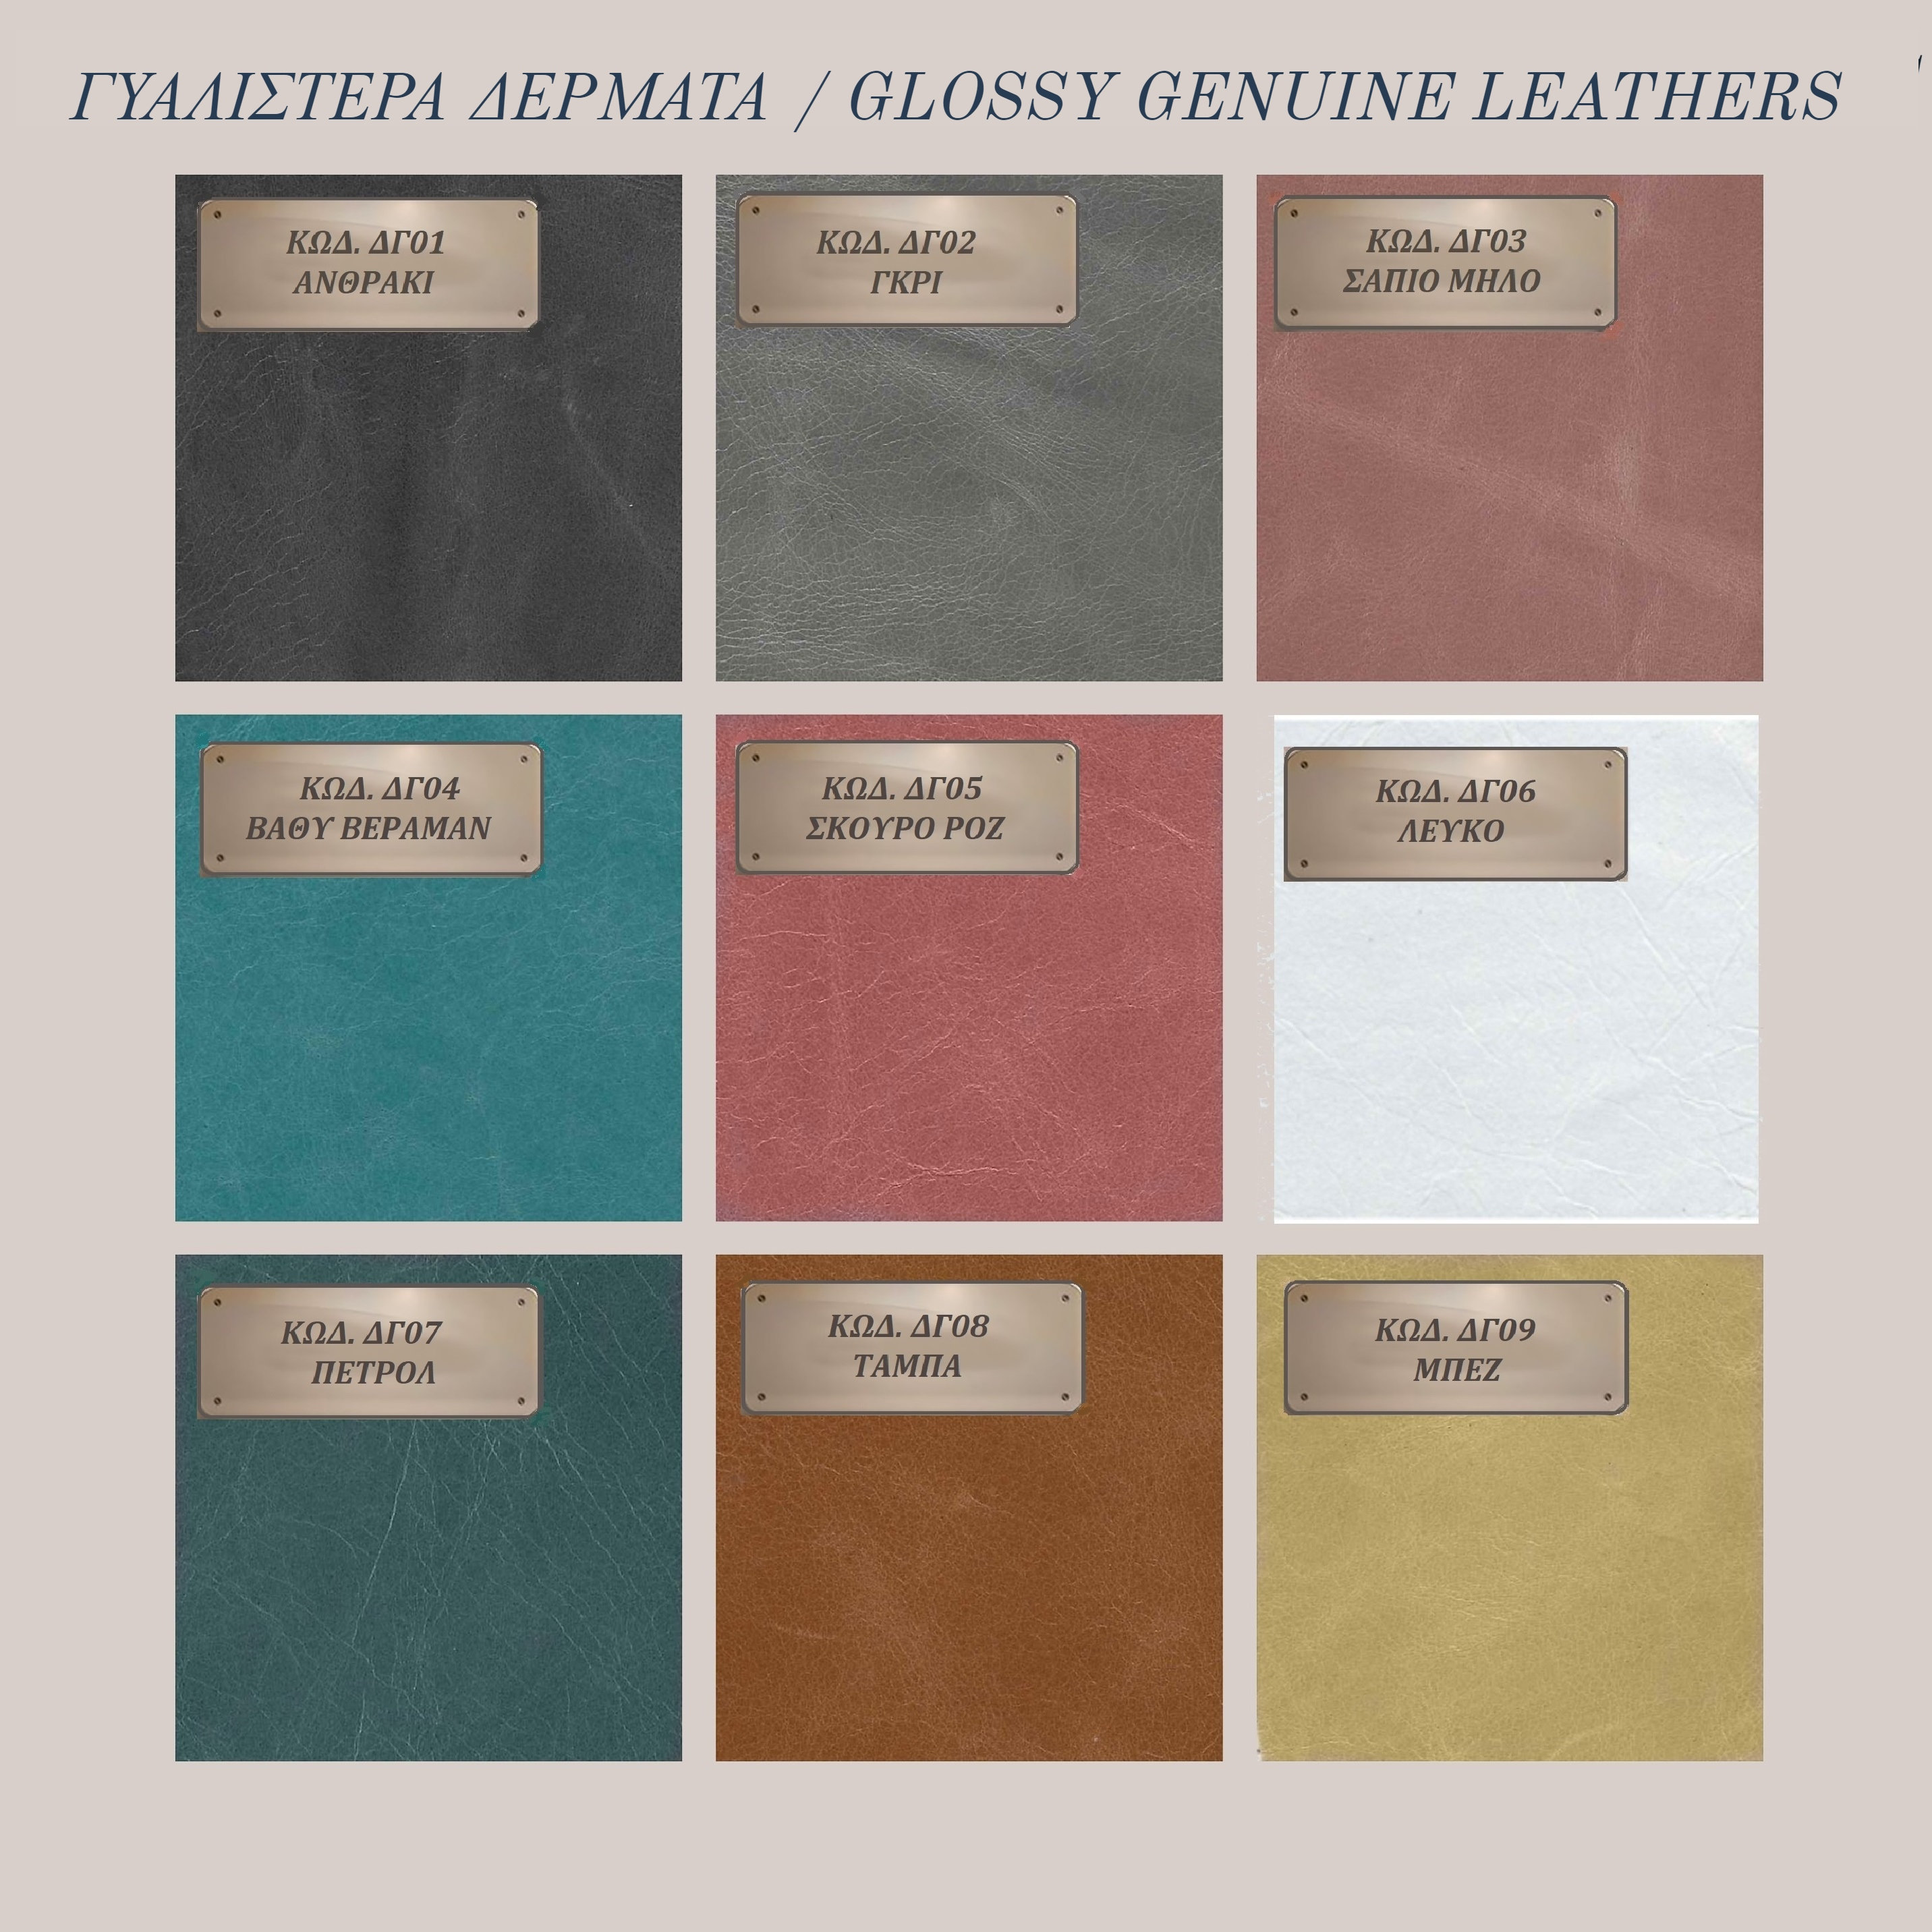 images/Items/Materials/02.GLOSSY GENUINE LEATHERS.jpg